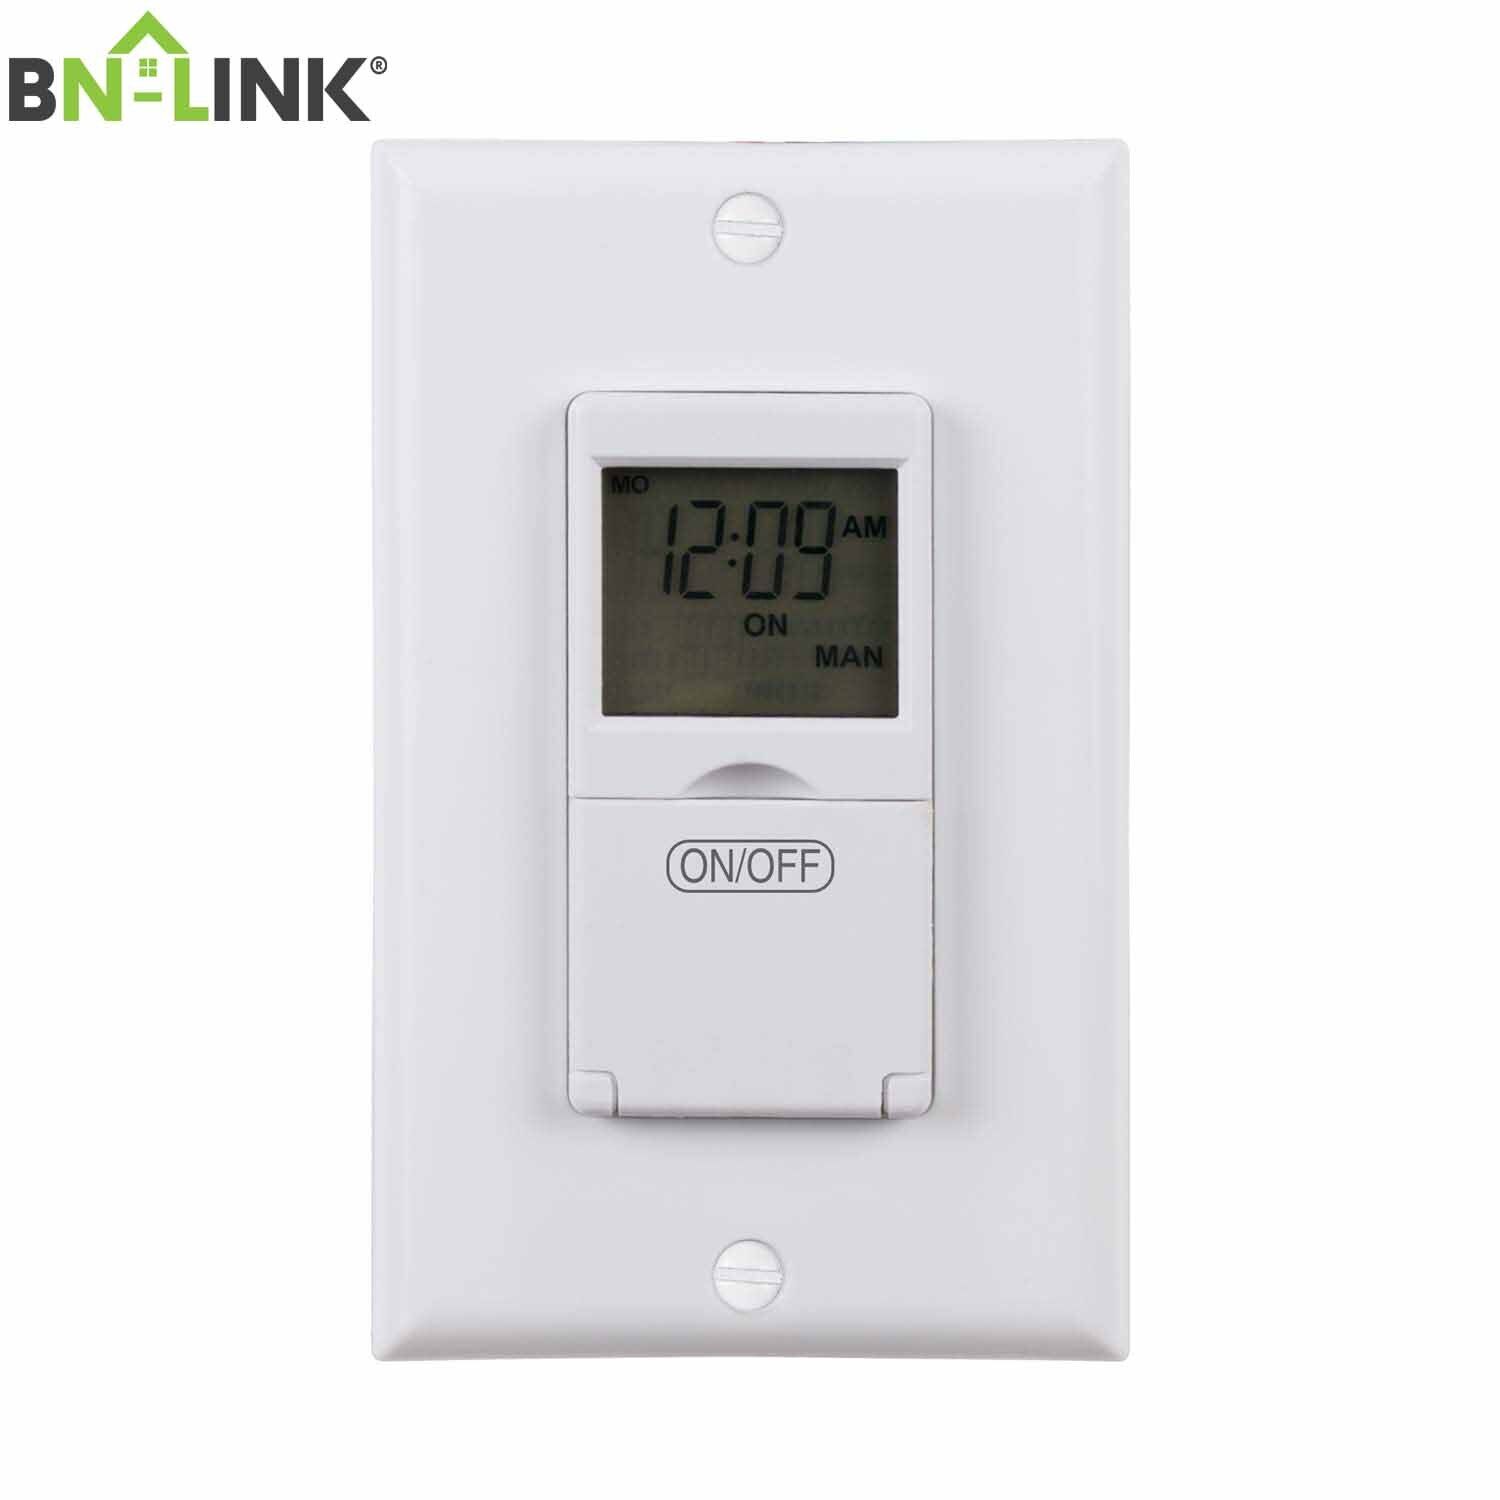 BN-LINK 7 Day Programmable In-Wall Timer Switch Digital for Fans, Lights, Motors